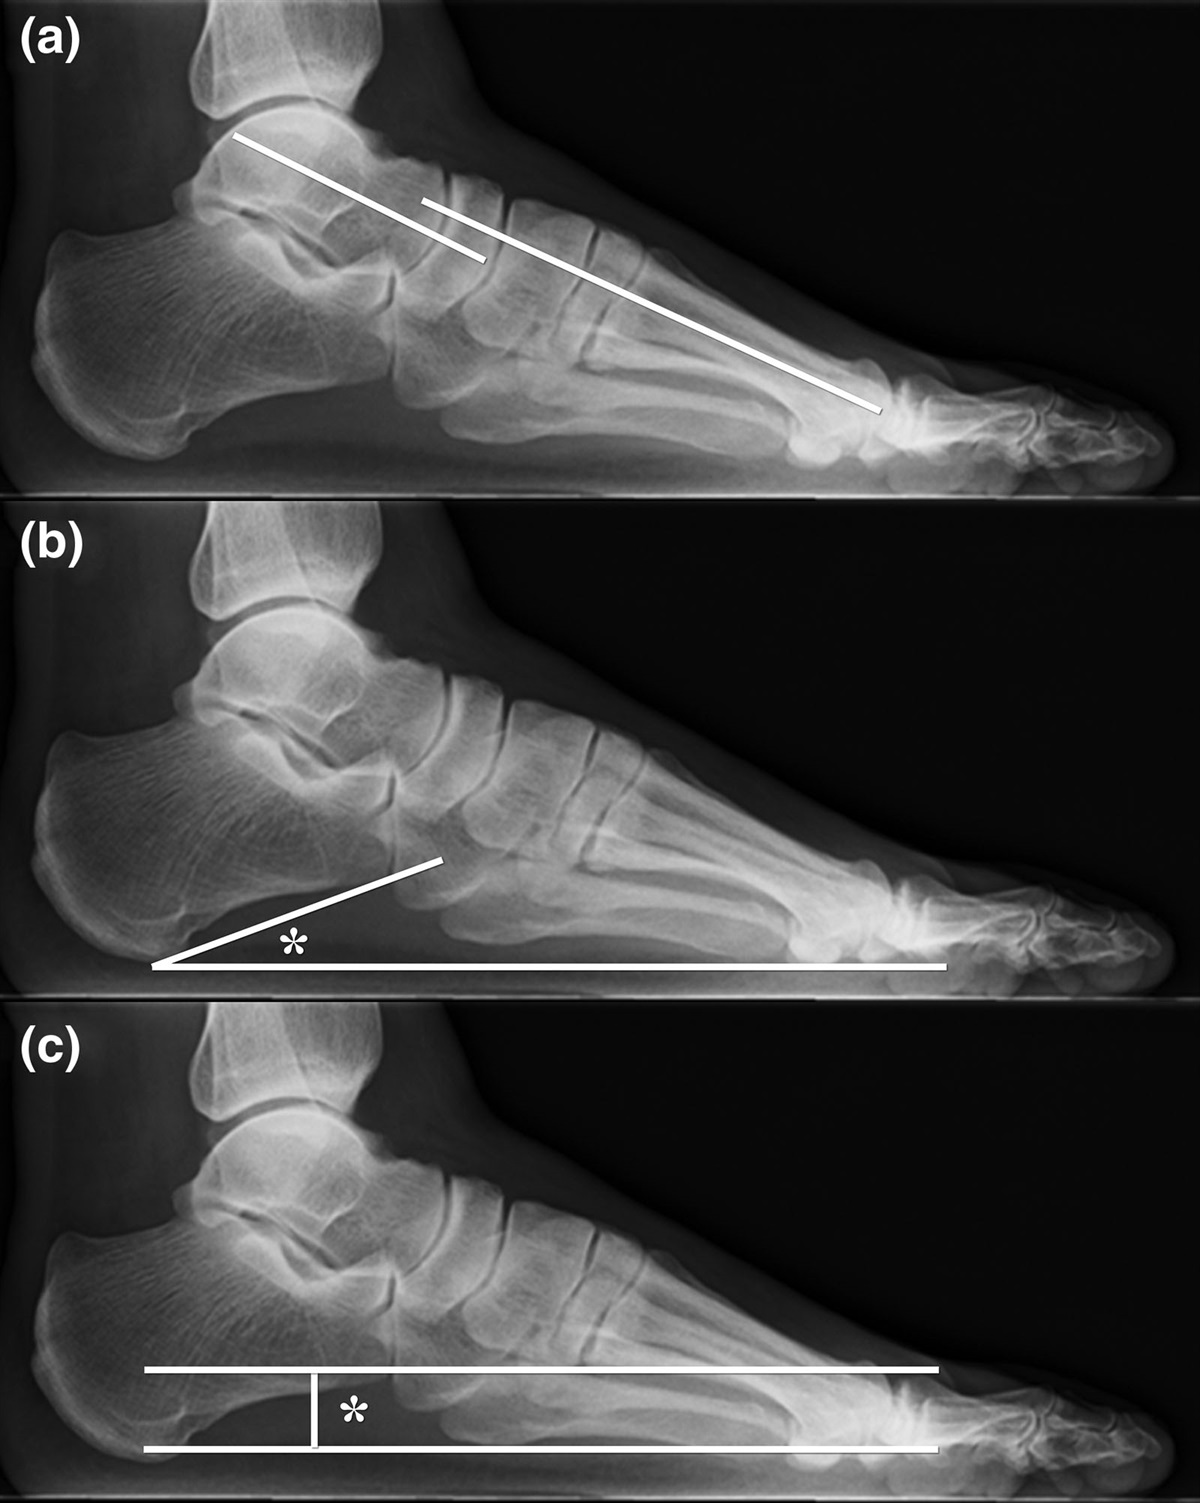 Radiographic foot alignment and morphological features of deltoid ligament in pediatric patients with medial osteochondral lesions of the talus